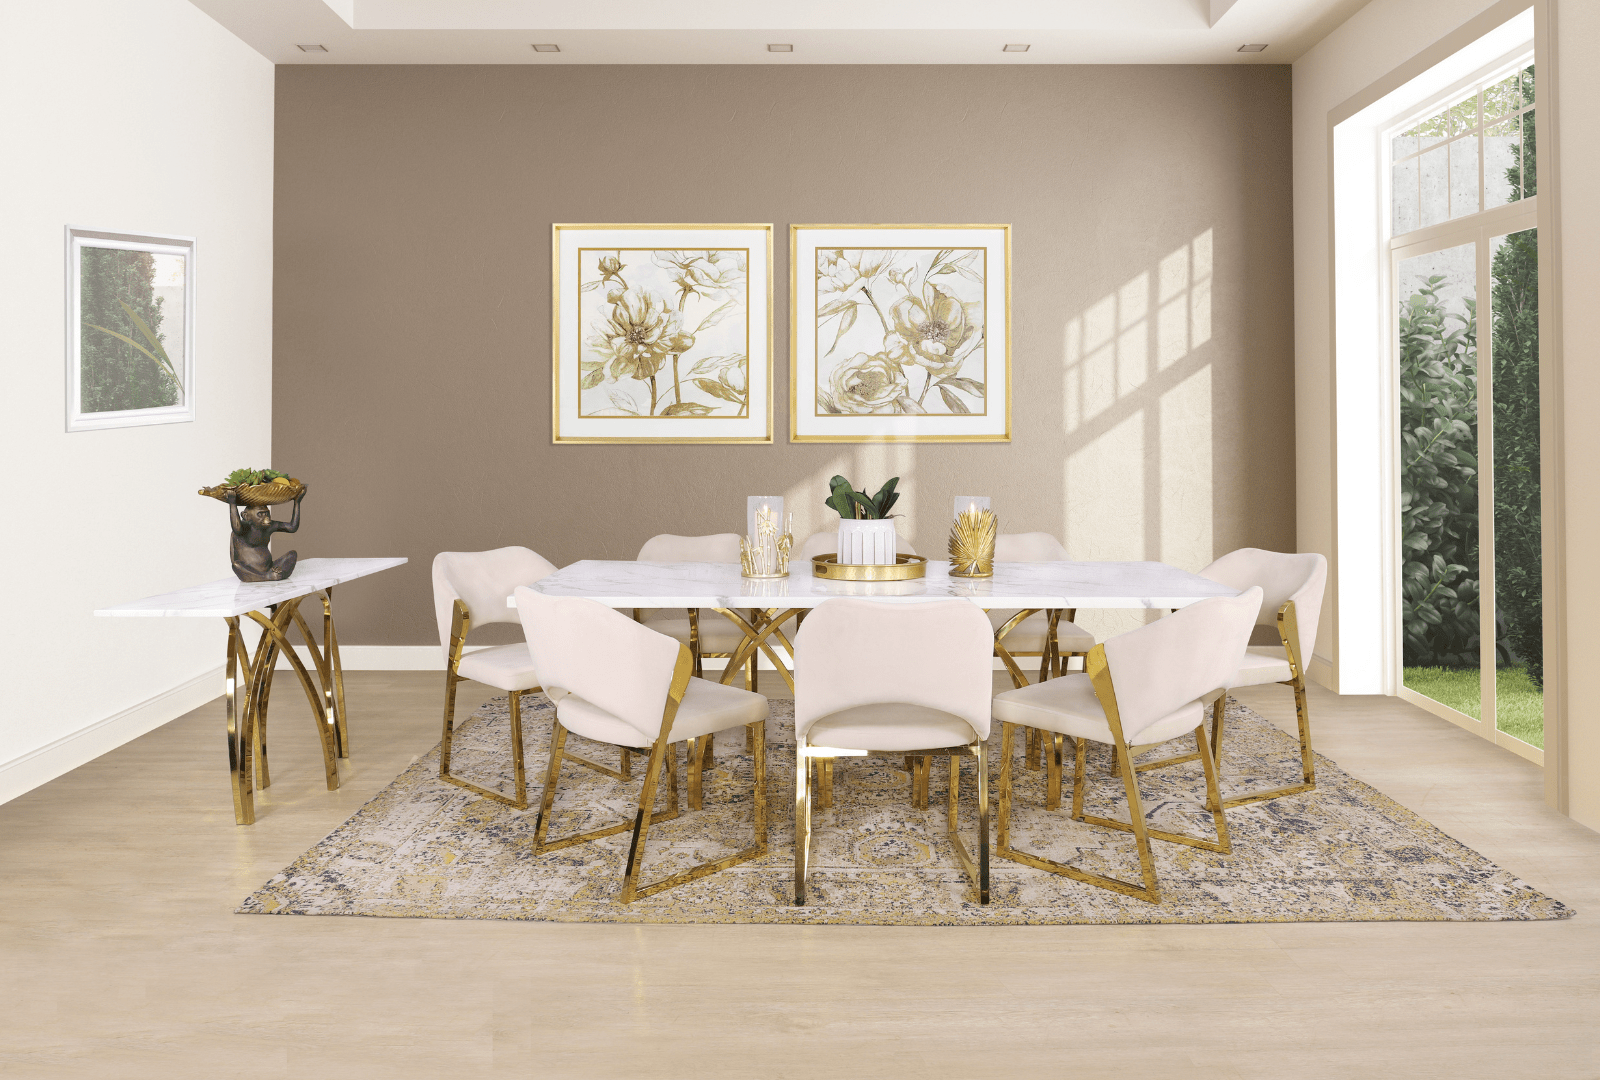 Feast in Style this Easter: Elevate Your Dining Room with the Sierra Dining Range